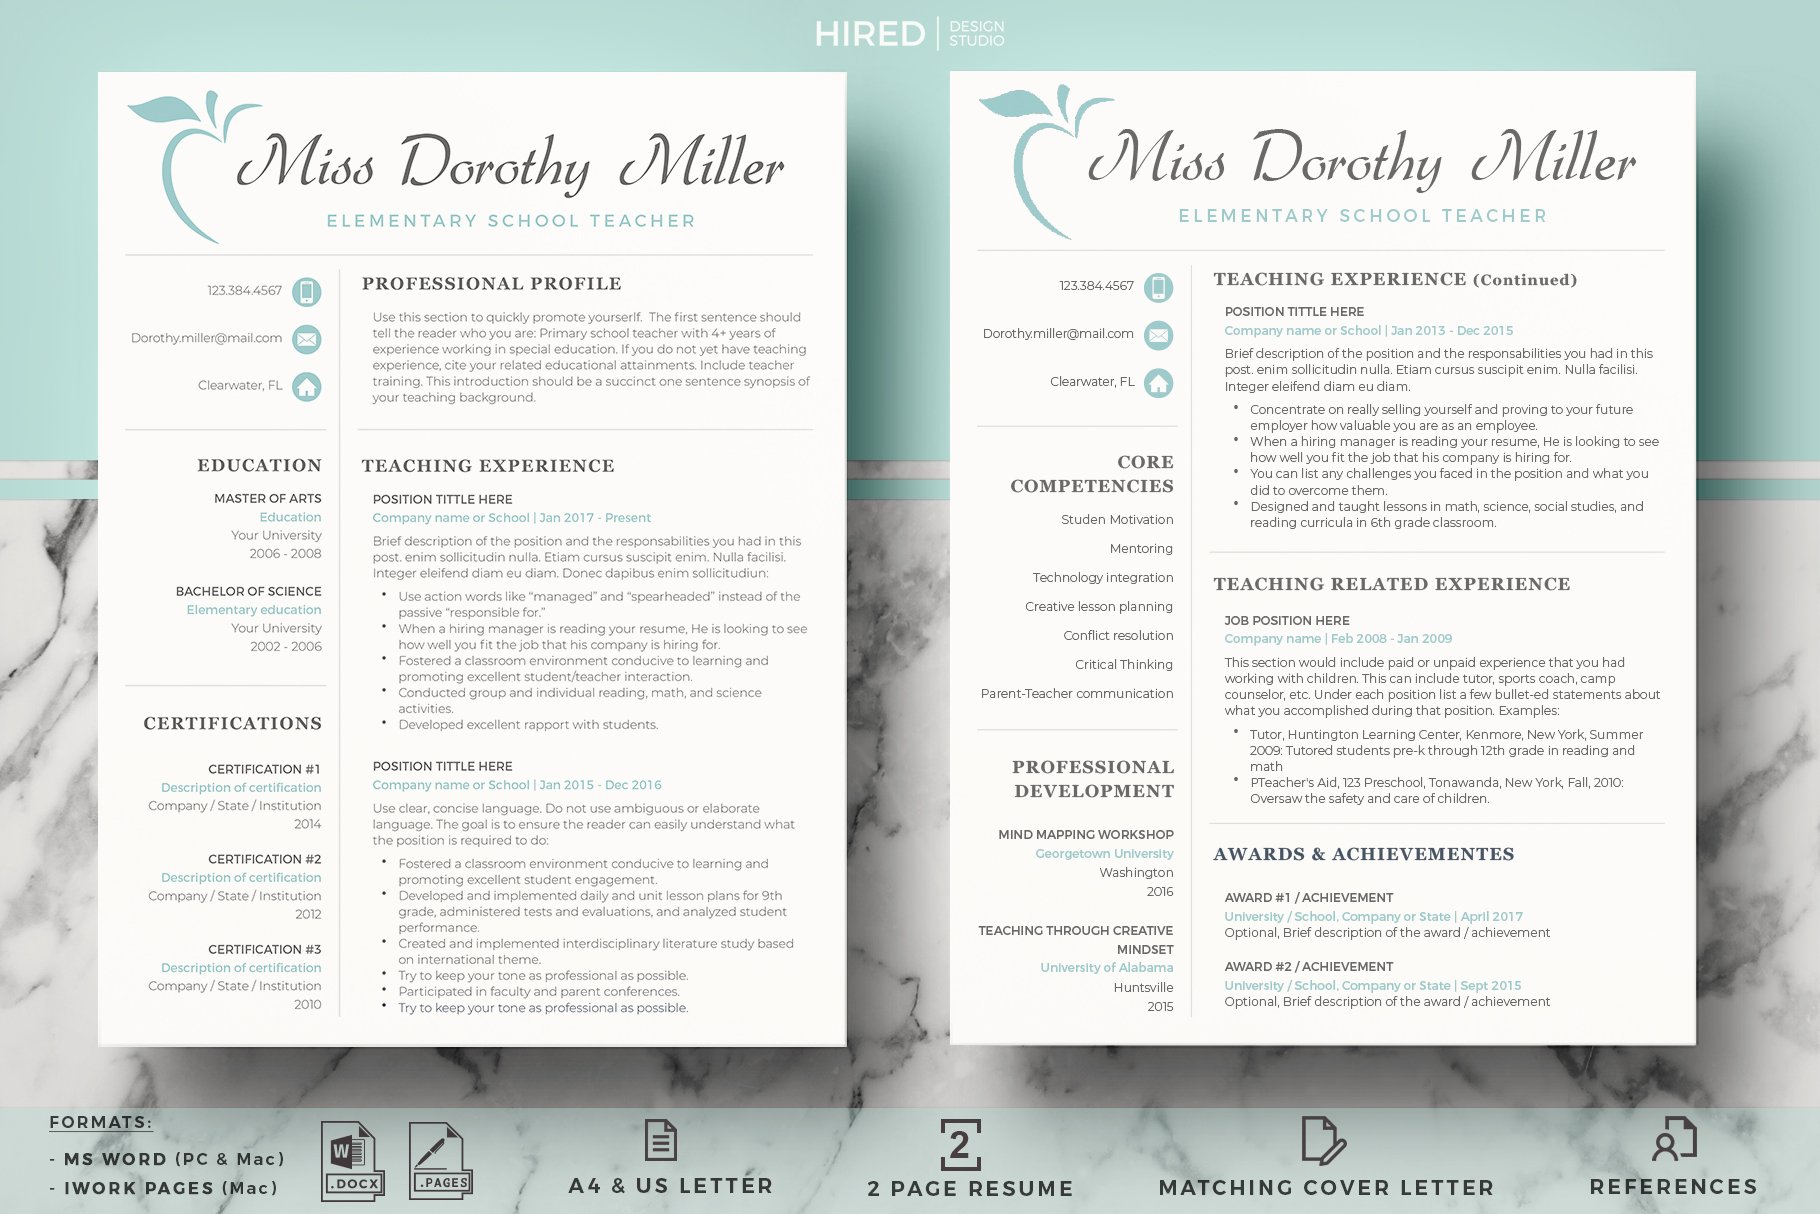 Professional Resume for Teachers preview image.